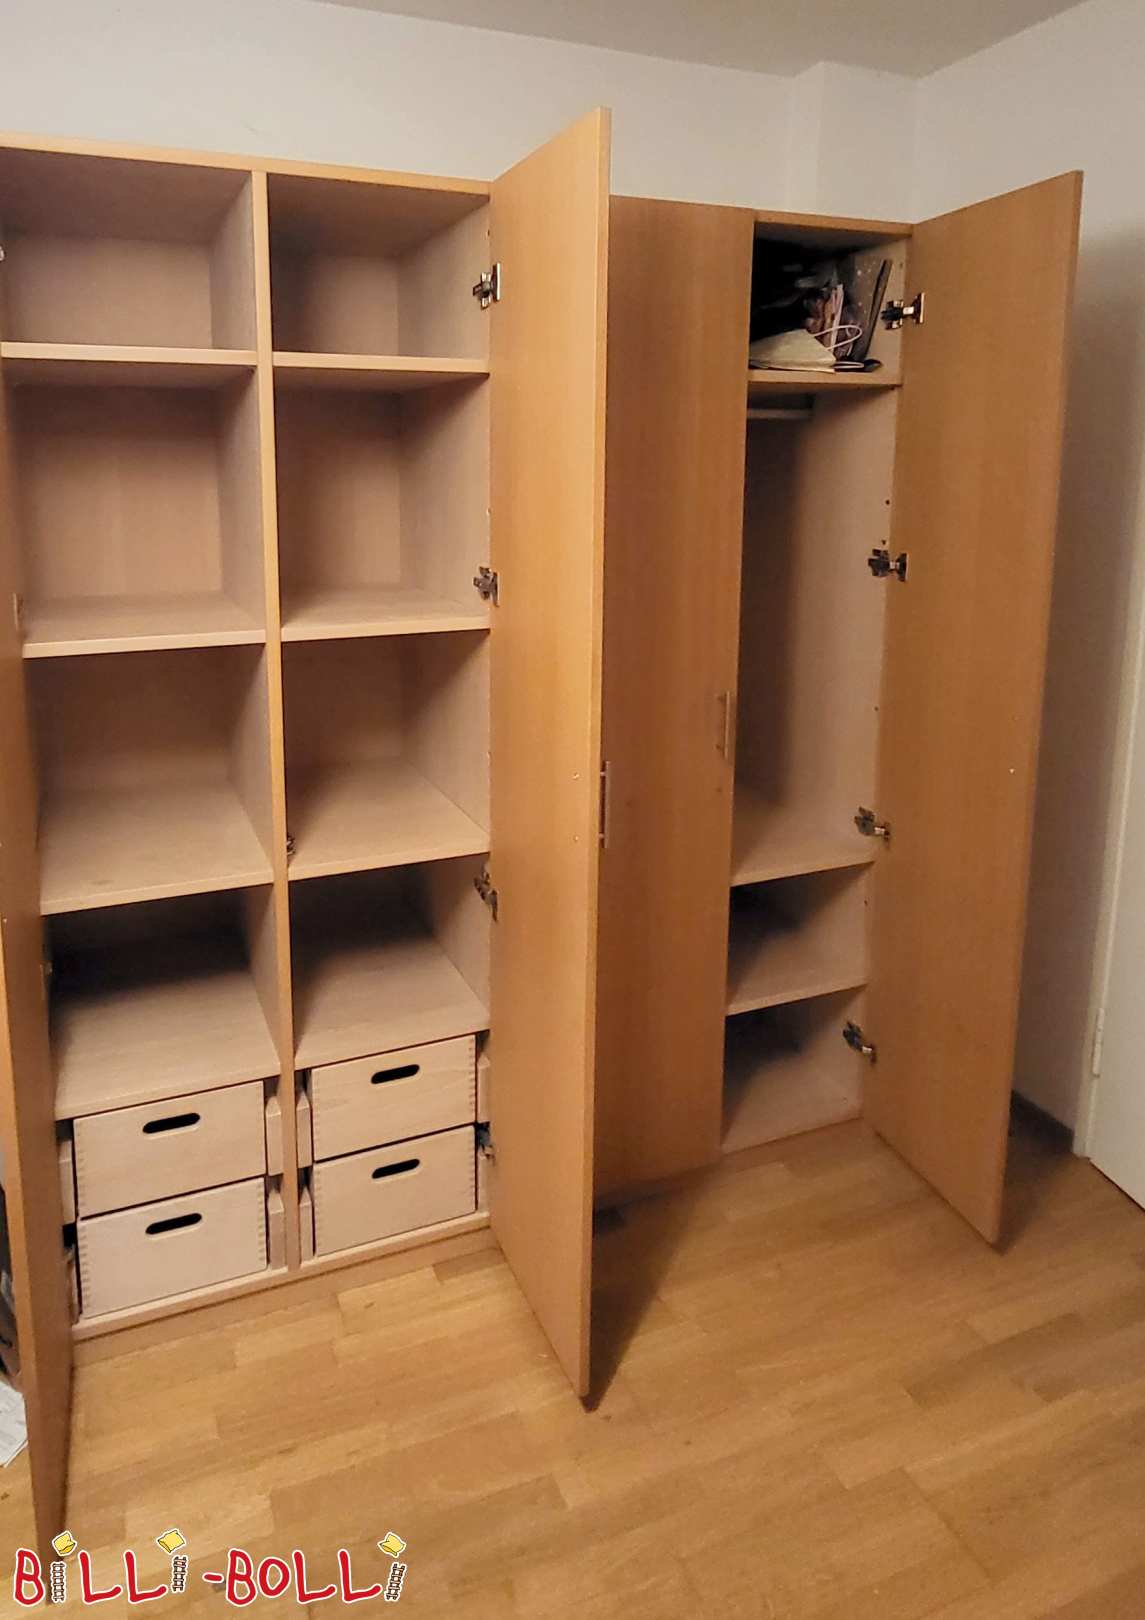 2 as good as new 2-door wardrobes in oiled-waxed beech (Category: Kids’ Furniture pre-owned)